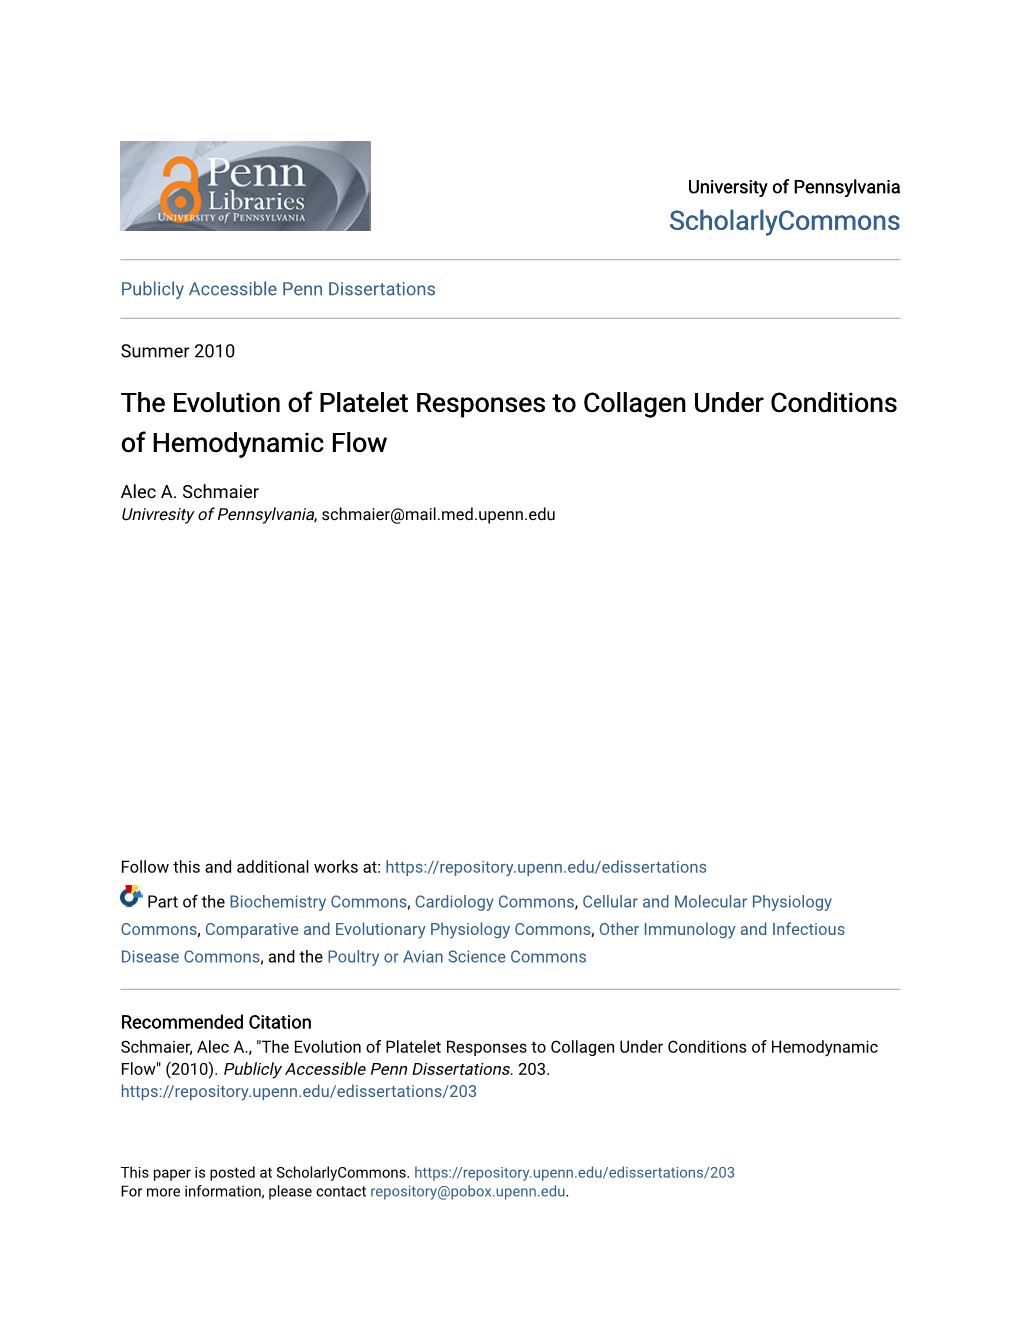 The Evolution of Platelet Responses to Collagen Under Conditions of Hemodynamic Flow